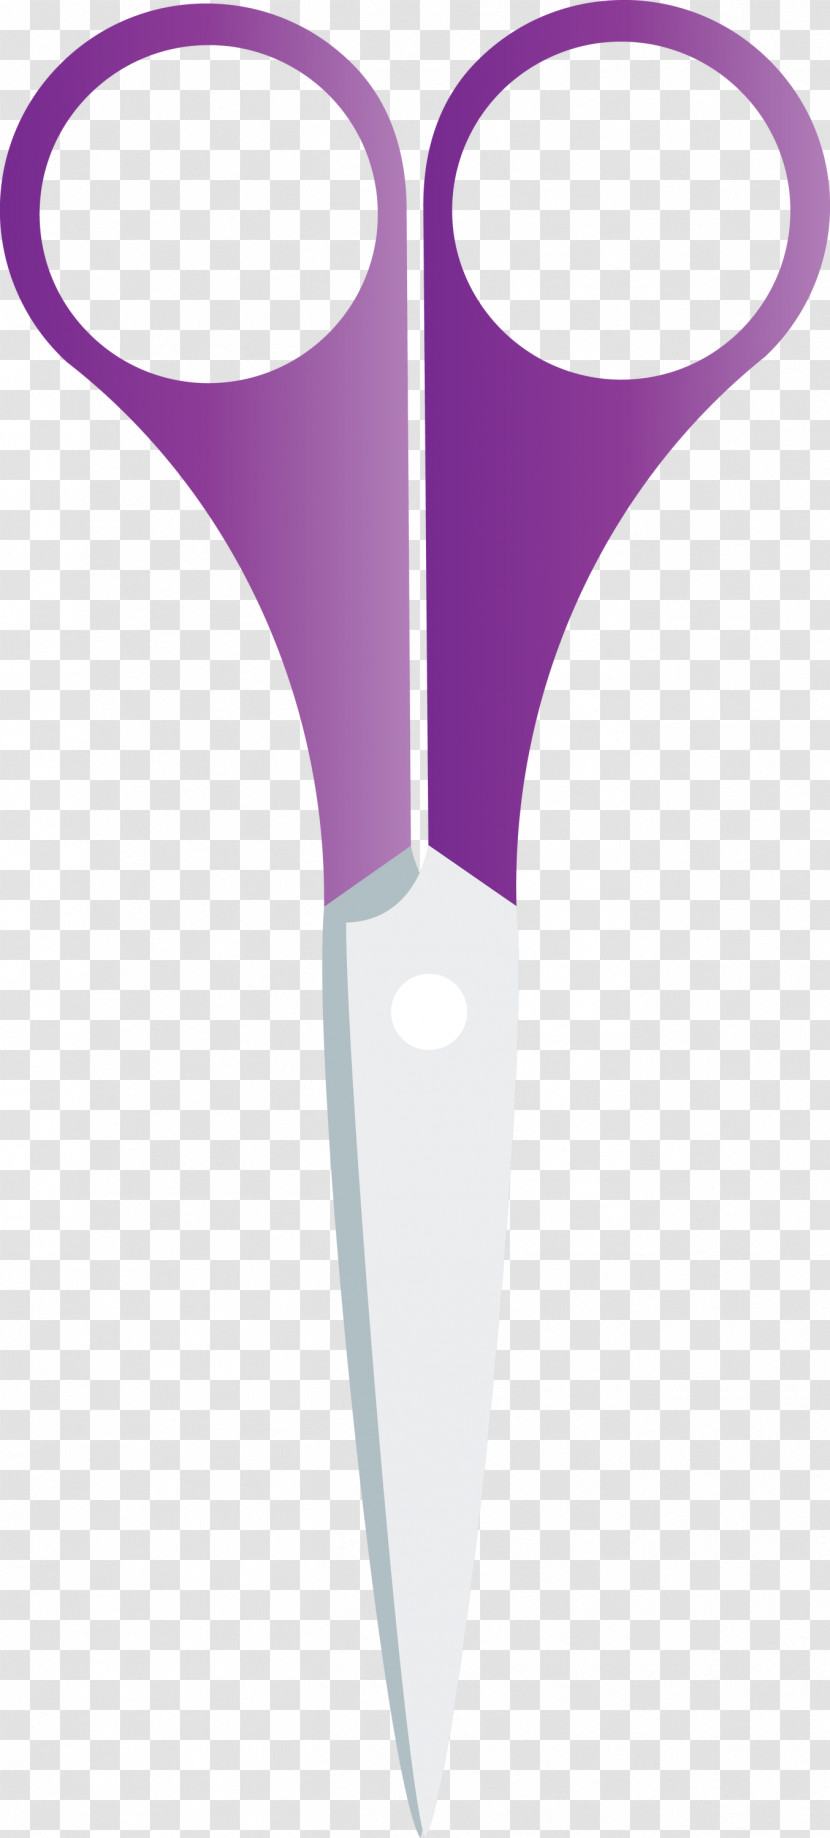 Back To School Supplies Transparent PNG